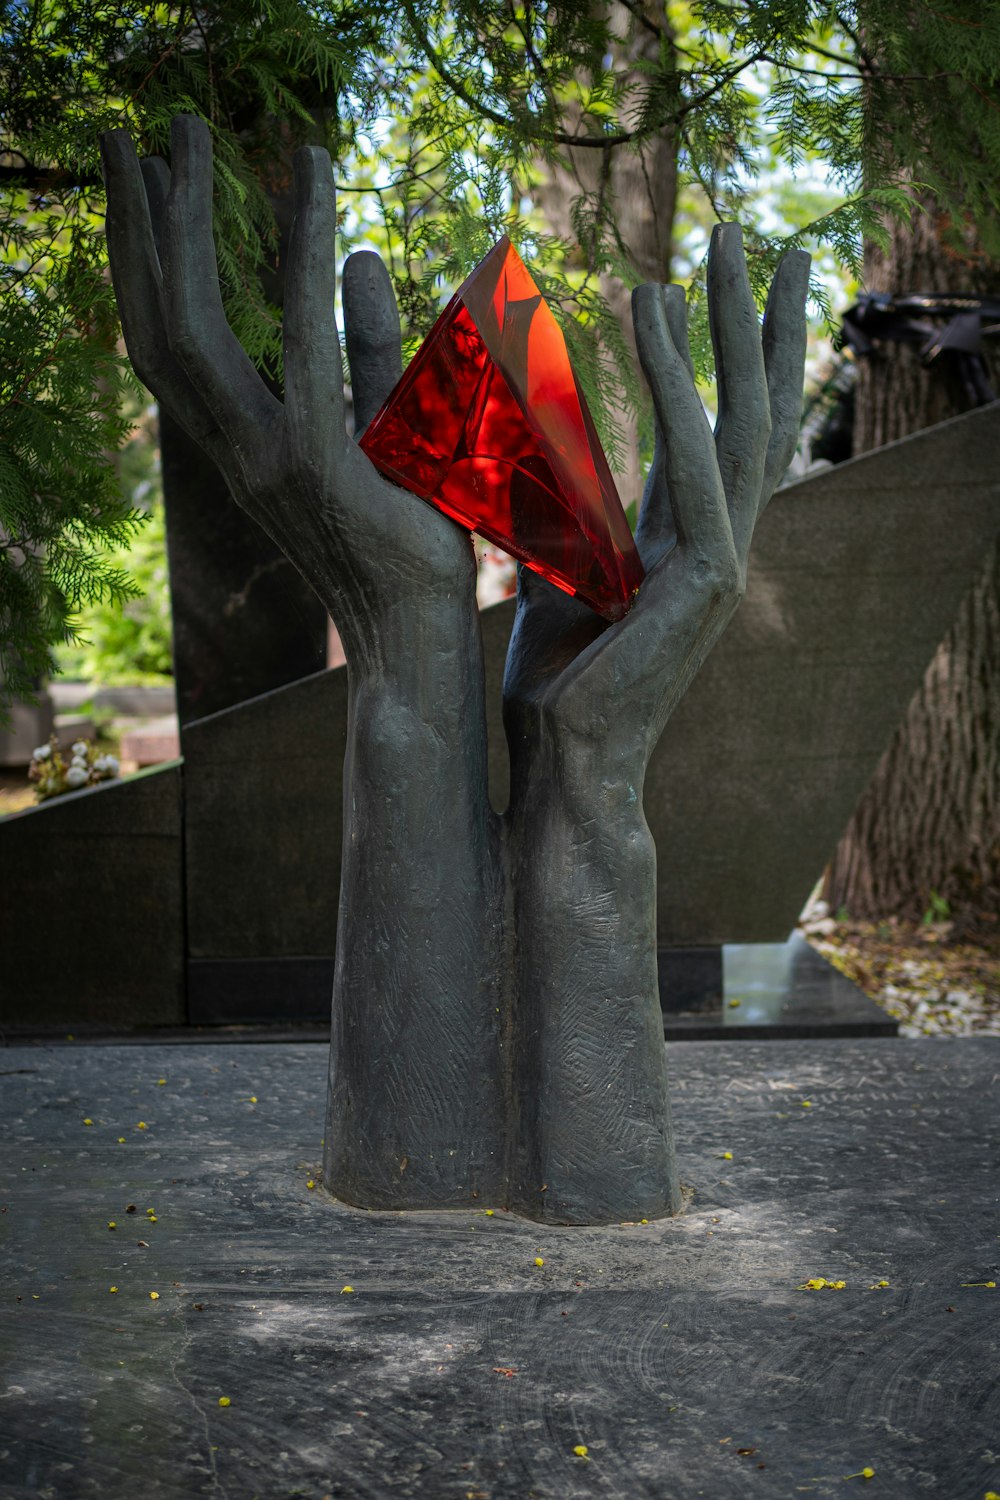 a sculpture of two hands holding a red triangle